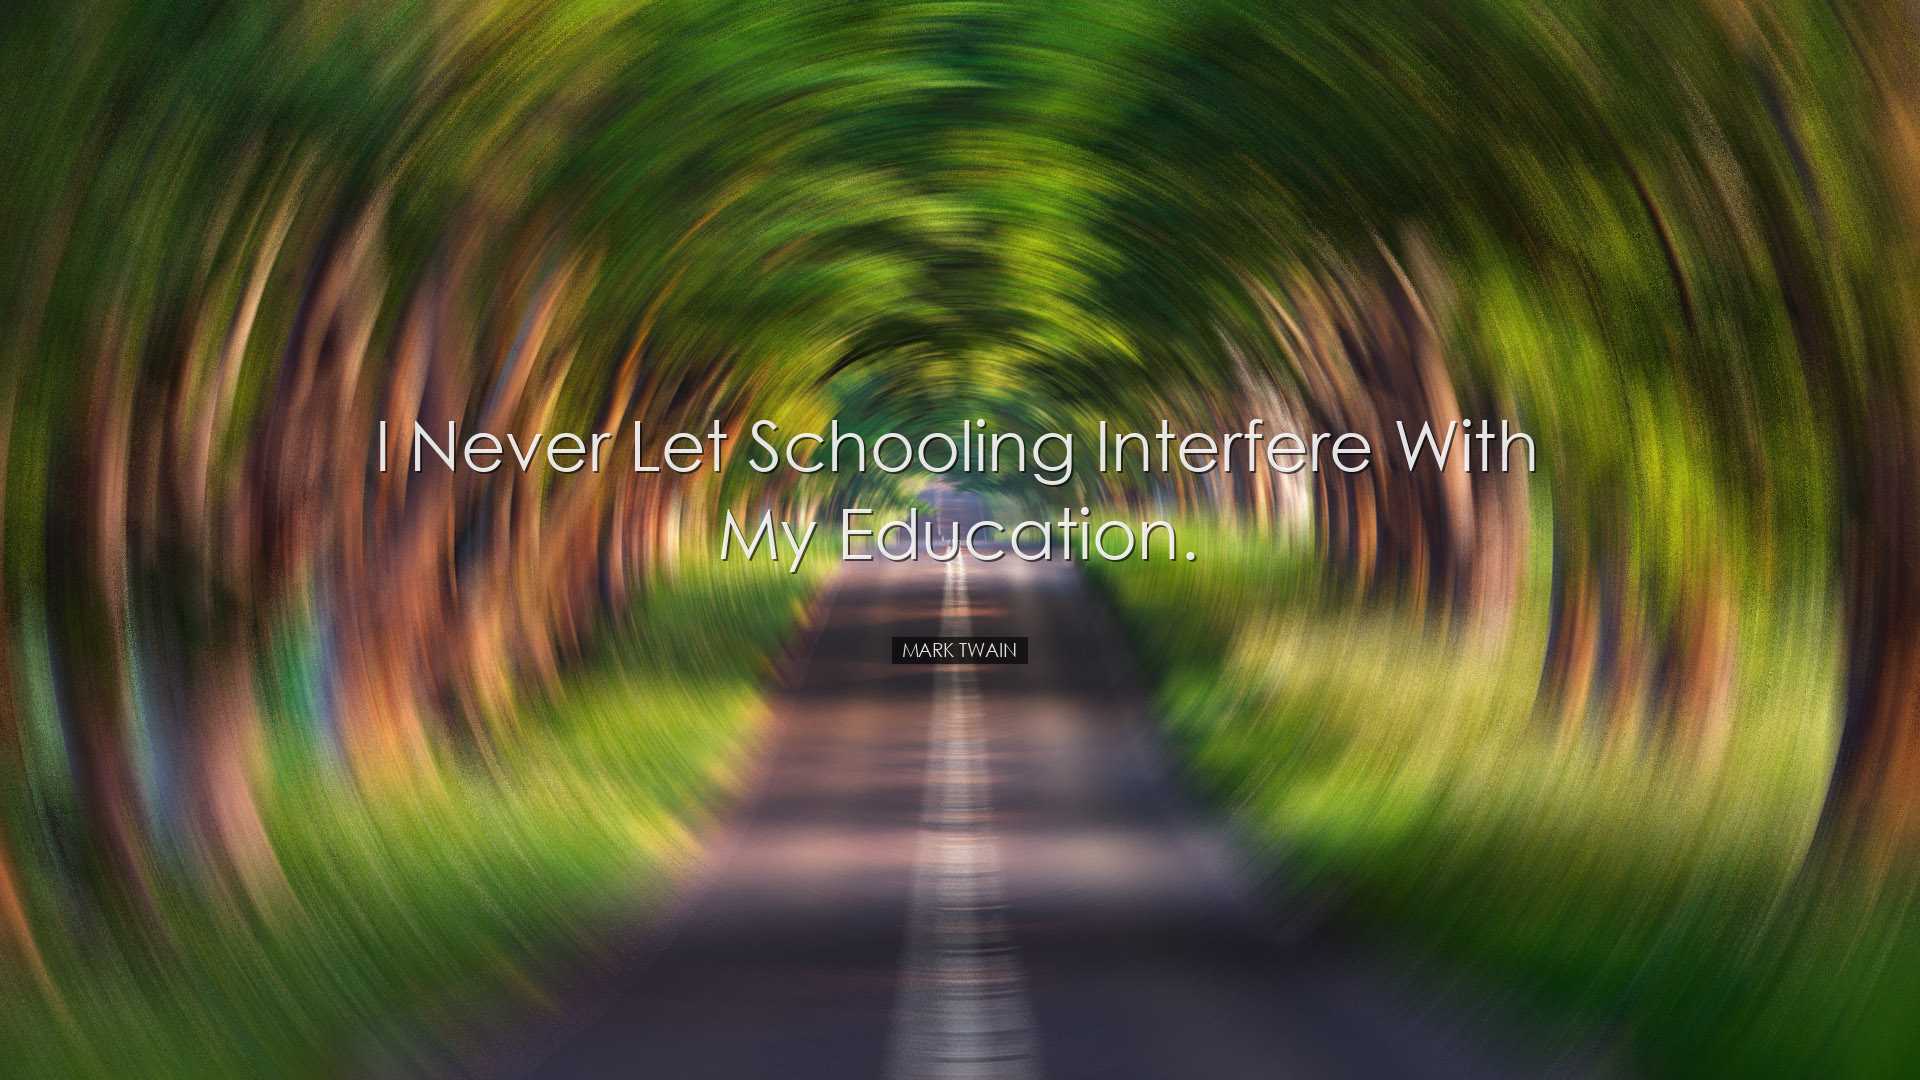 I never let schooling interfere with my education. - Mark Twain